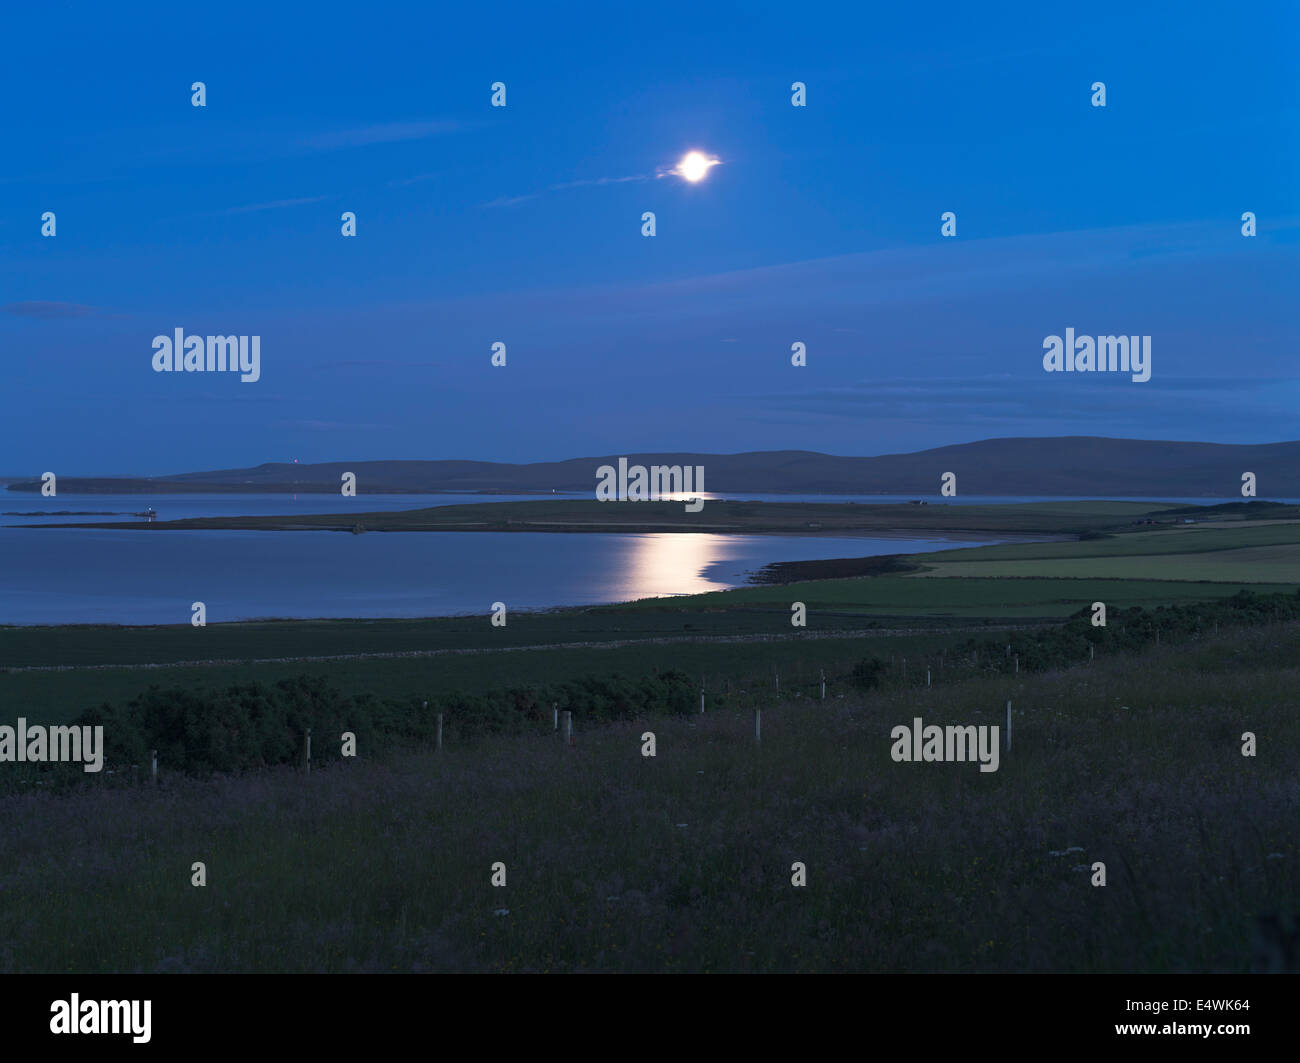 dh Scapa Flow ORPHIR ORKNEY Moonlight on water moon light sea sky dusk landscape moonlit field country night countryside uk evening Stock Photo